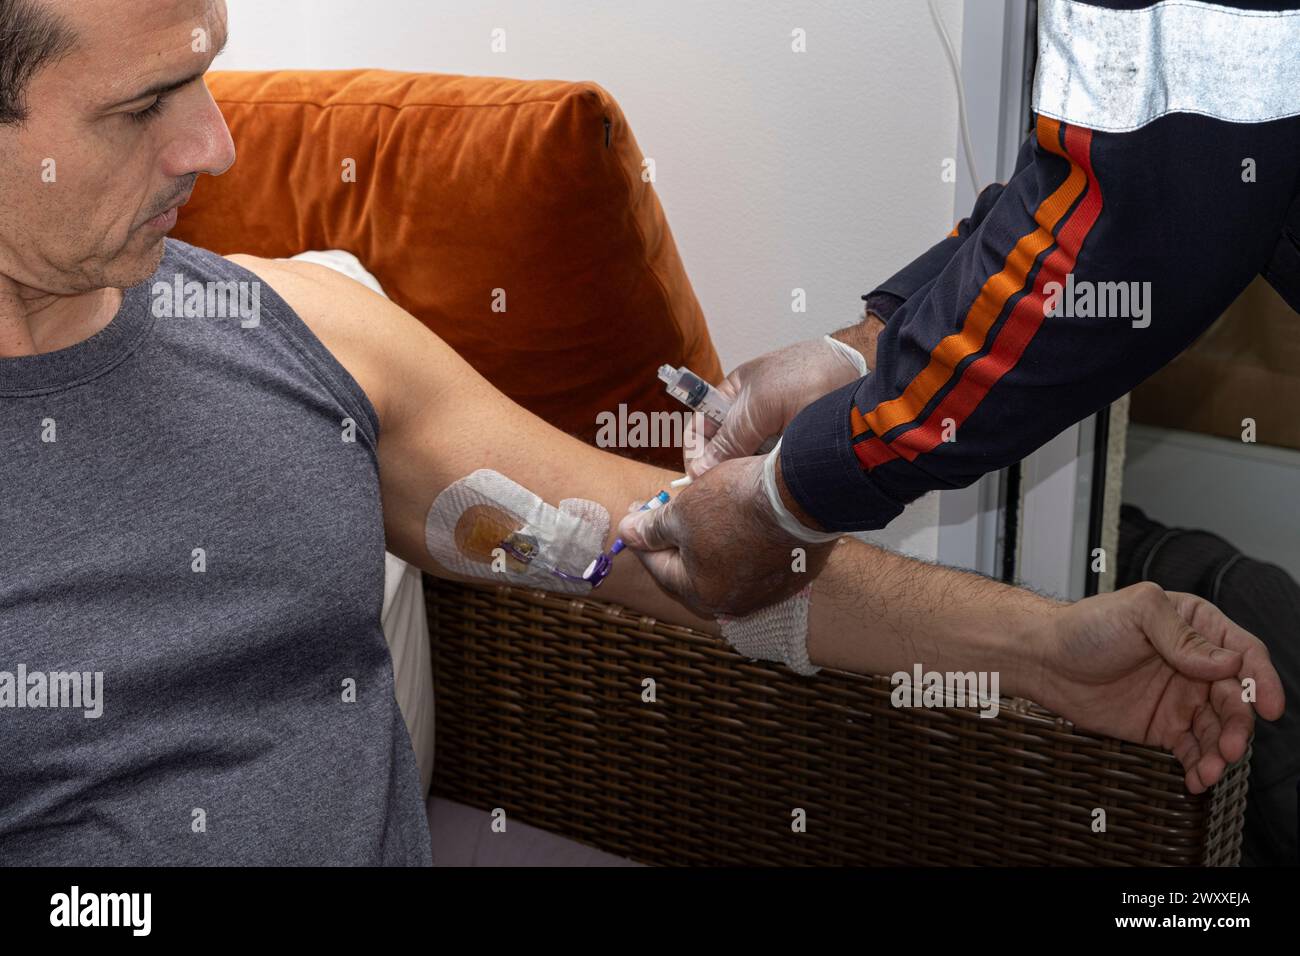 Nurse, with protective gloves, placing the serum equipment on the catheter to give the anti-inflammatory. Stock Photo